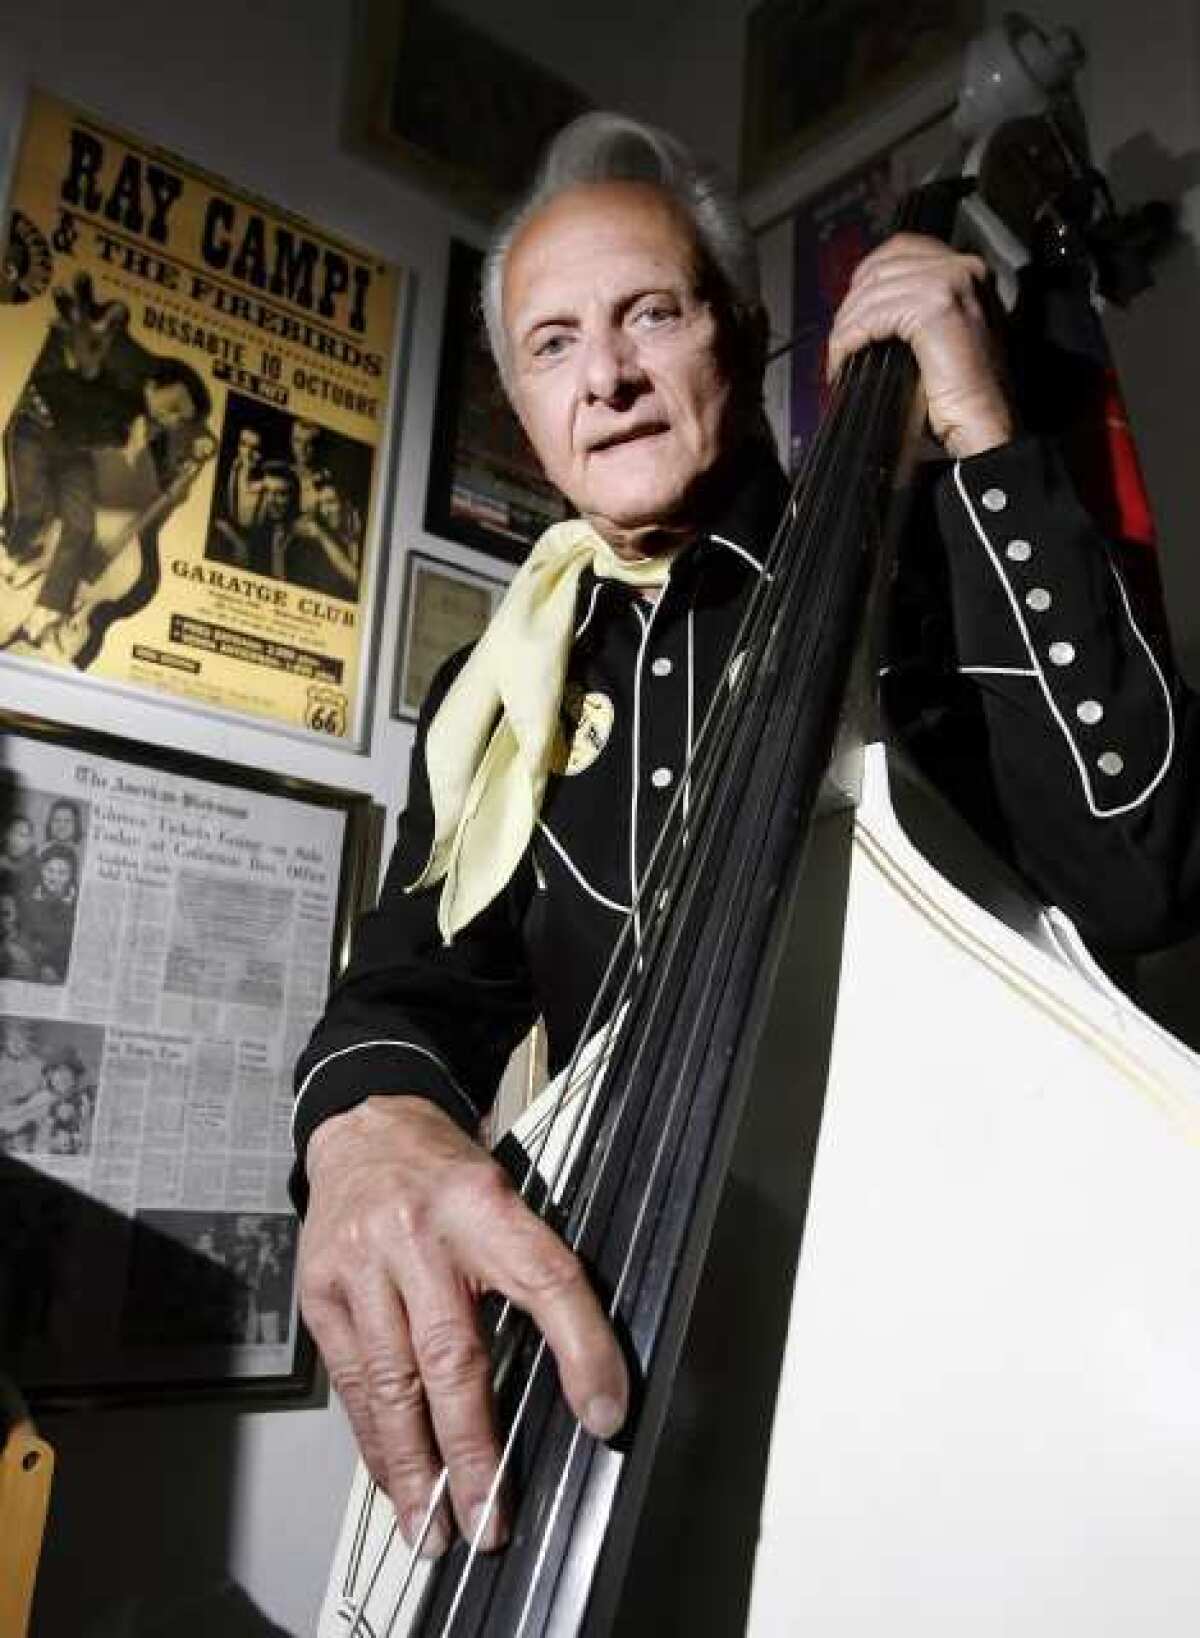 Rockabilly pioneer Ray Campi and his upright bass at his home in Los Angeles. Campi will perform at Burbank's Viva Cantina to celebrate his 78th birthday.